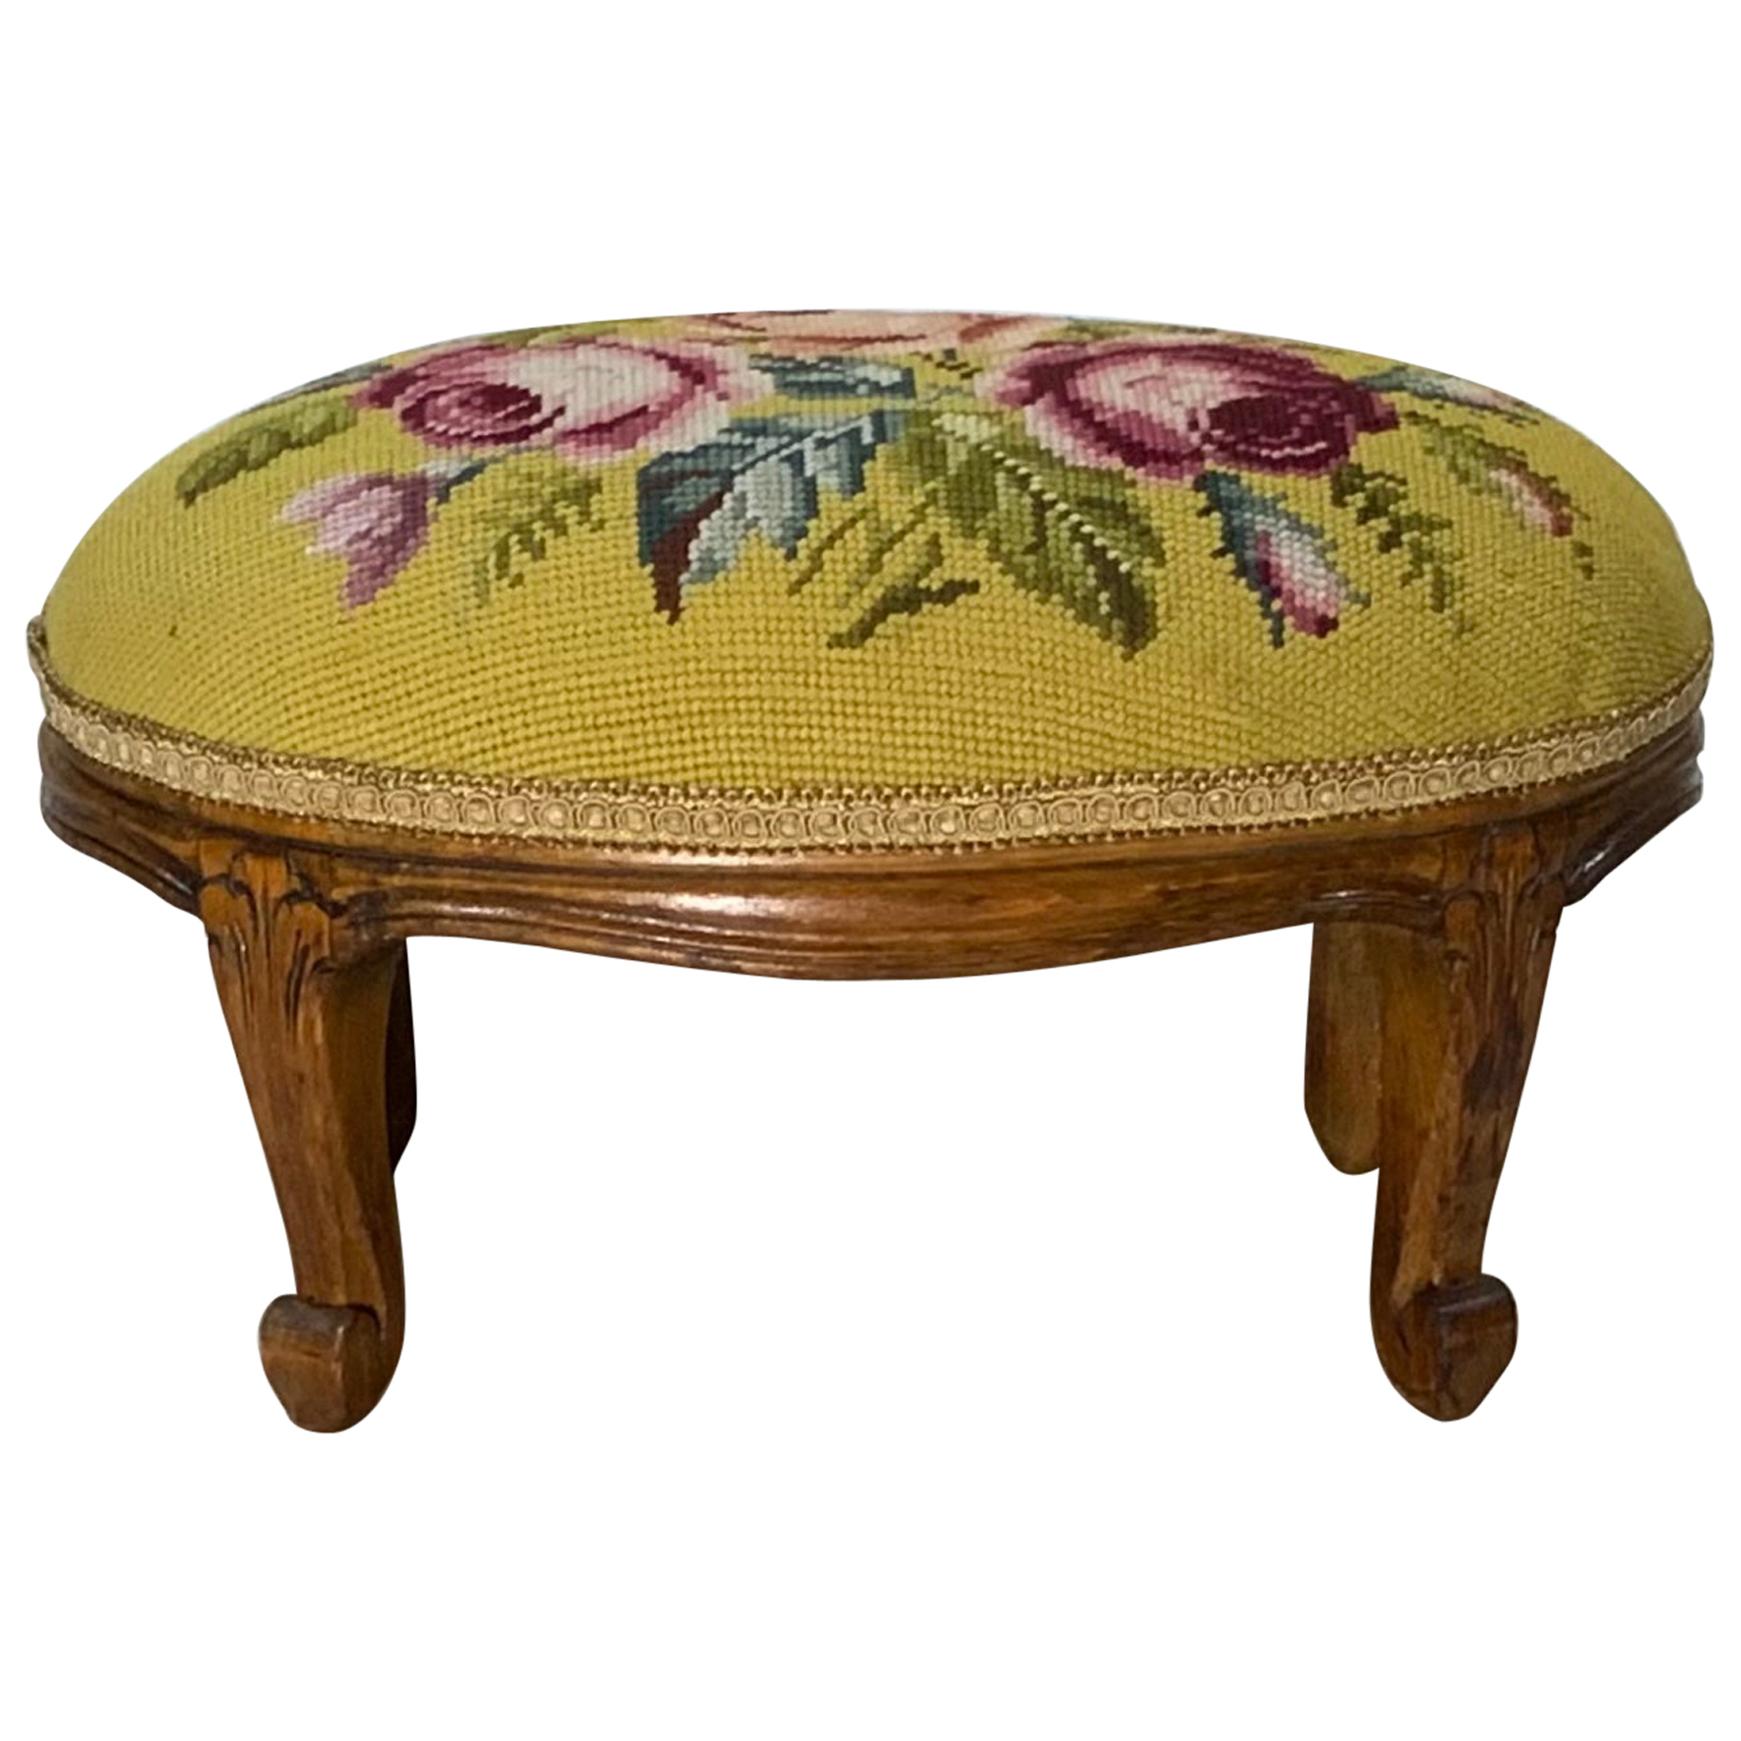 Early 20th Century French Fruitwood Footstool with Antique Needlepoint Tapestry